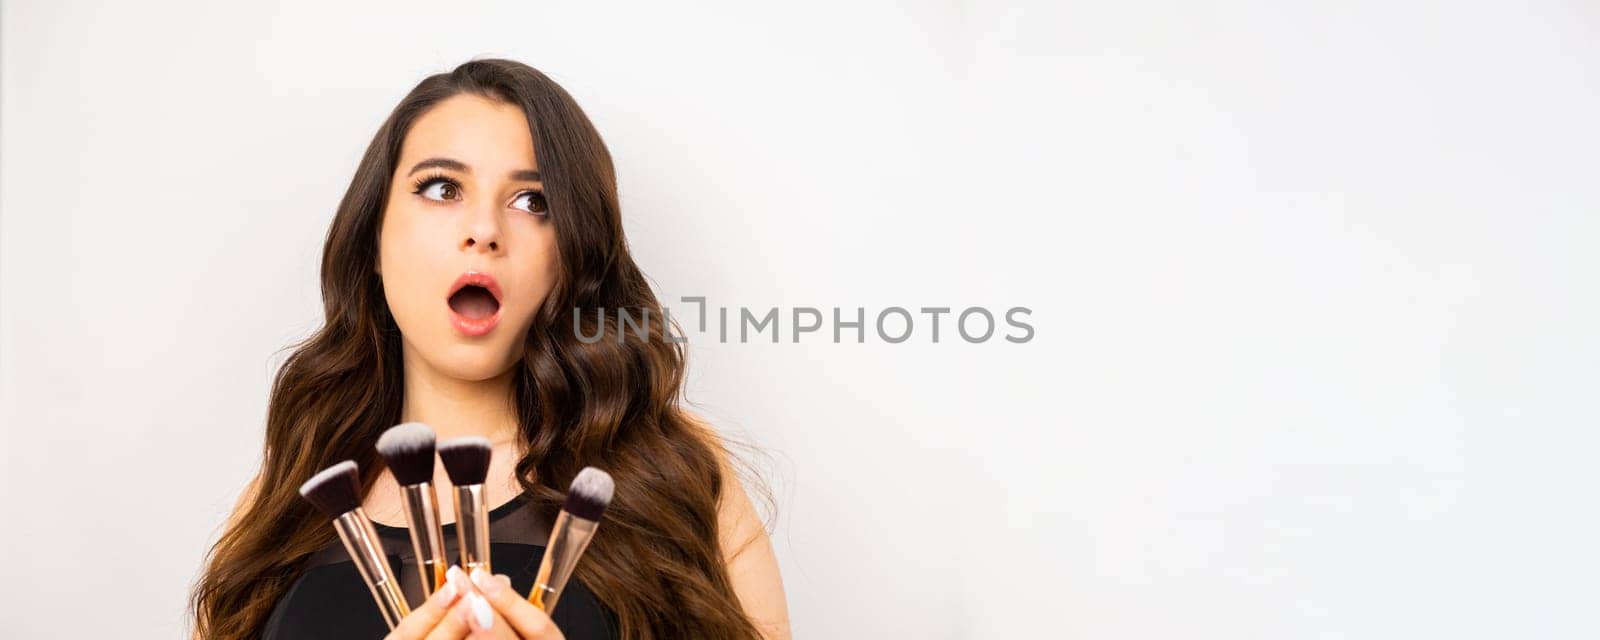 Banner with an attractive excited woman holding a set of makeup brushes for professional use, copy space.